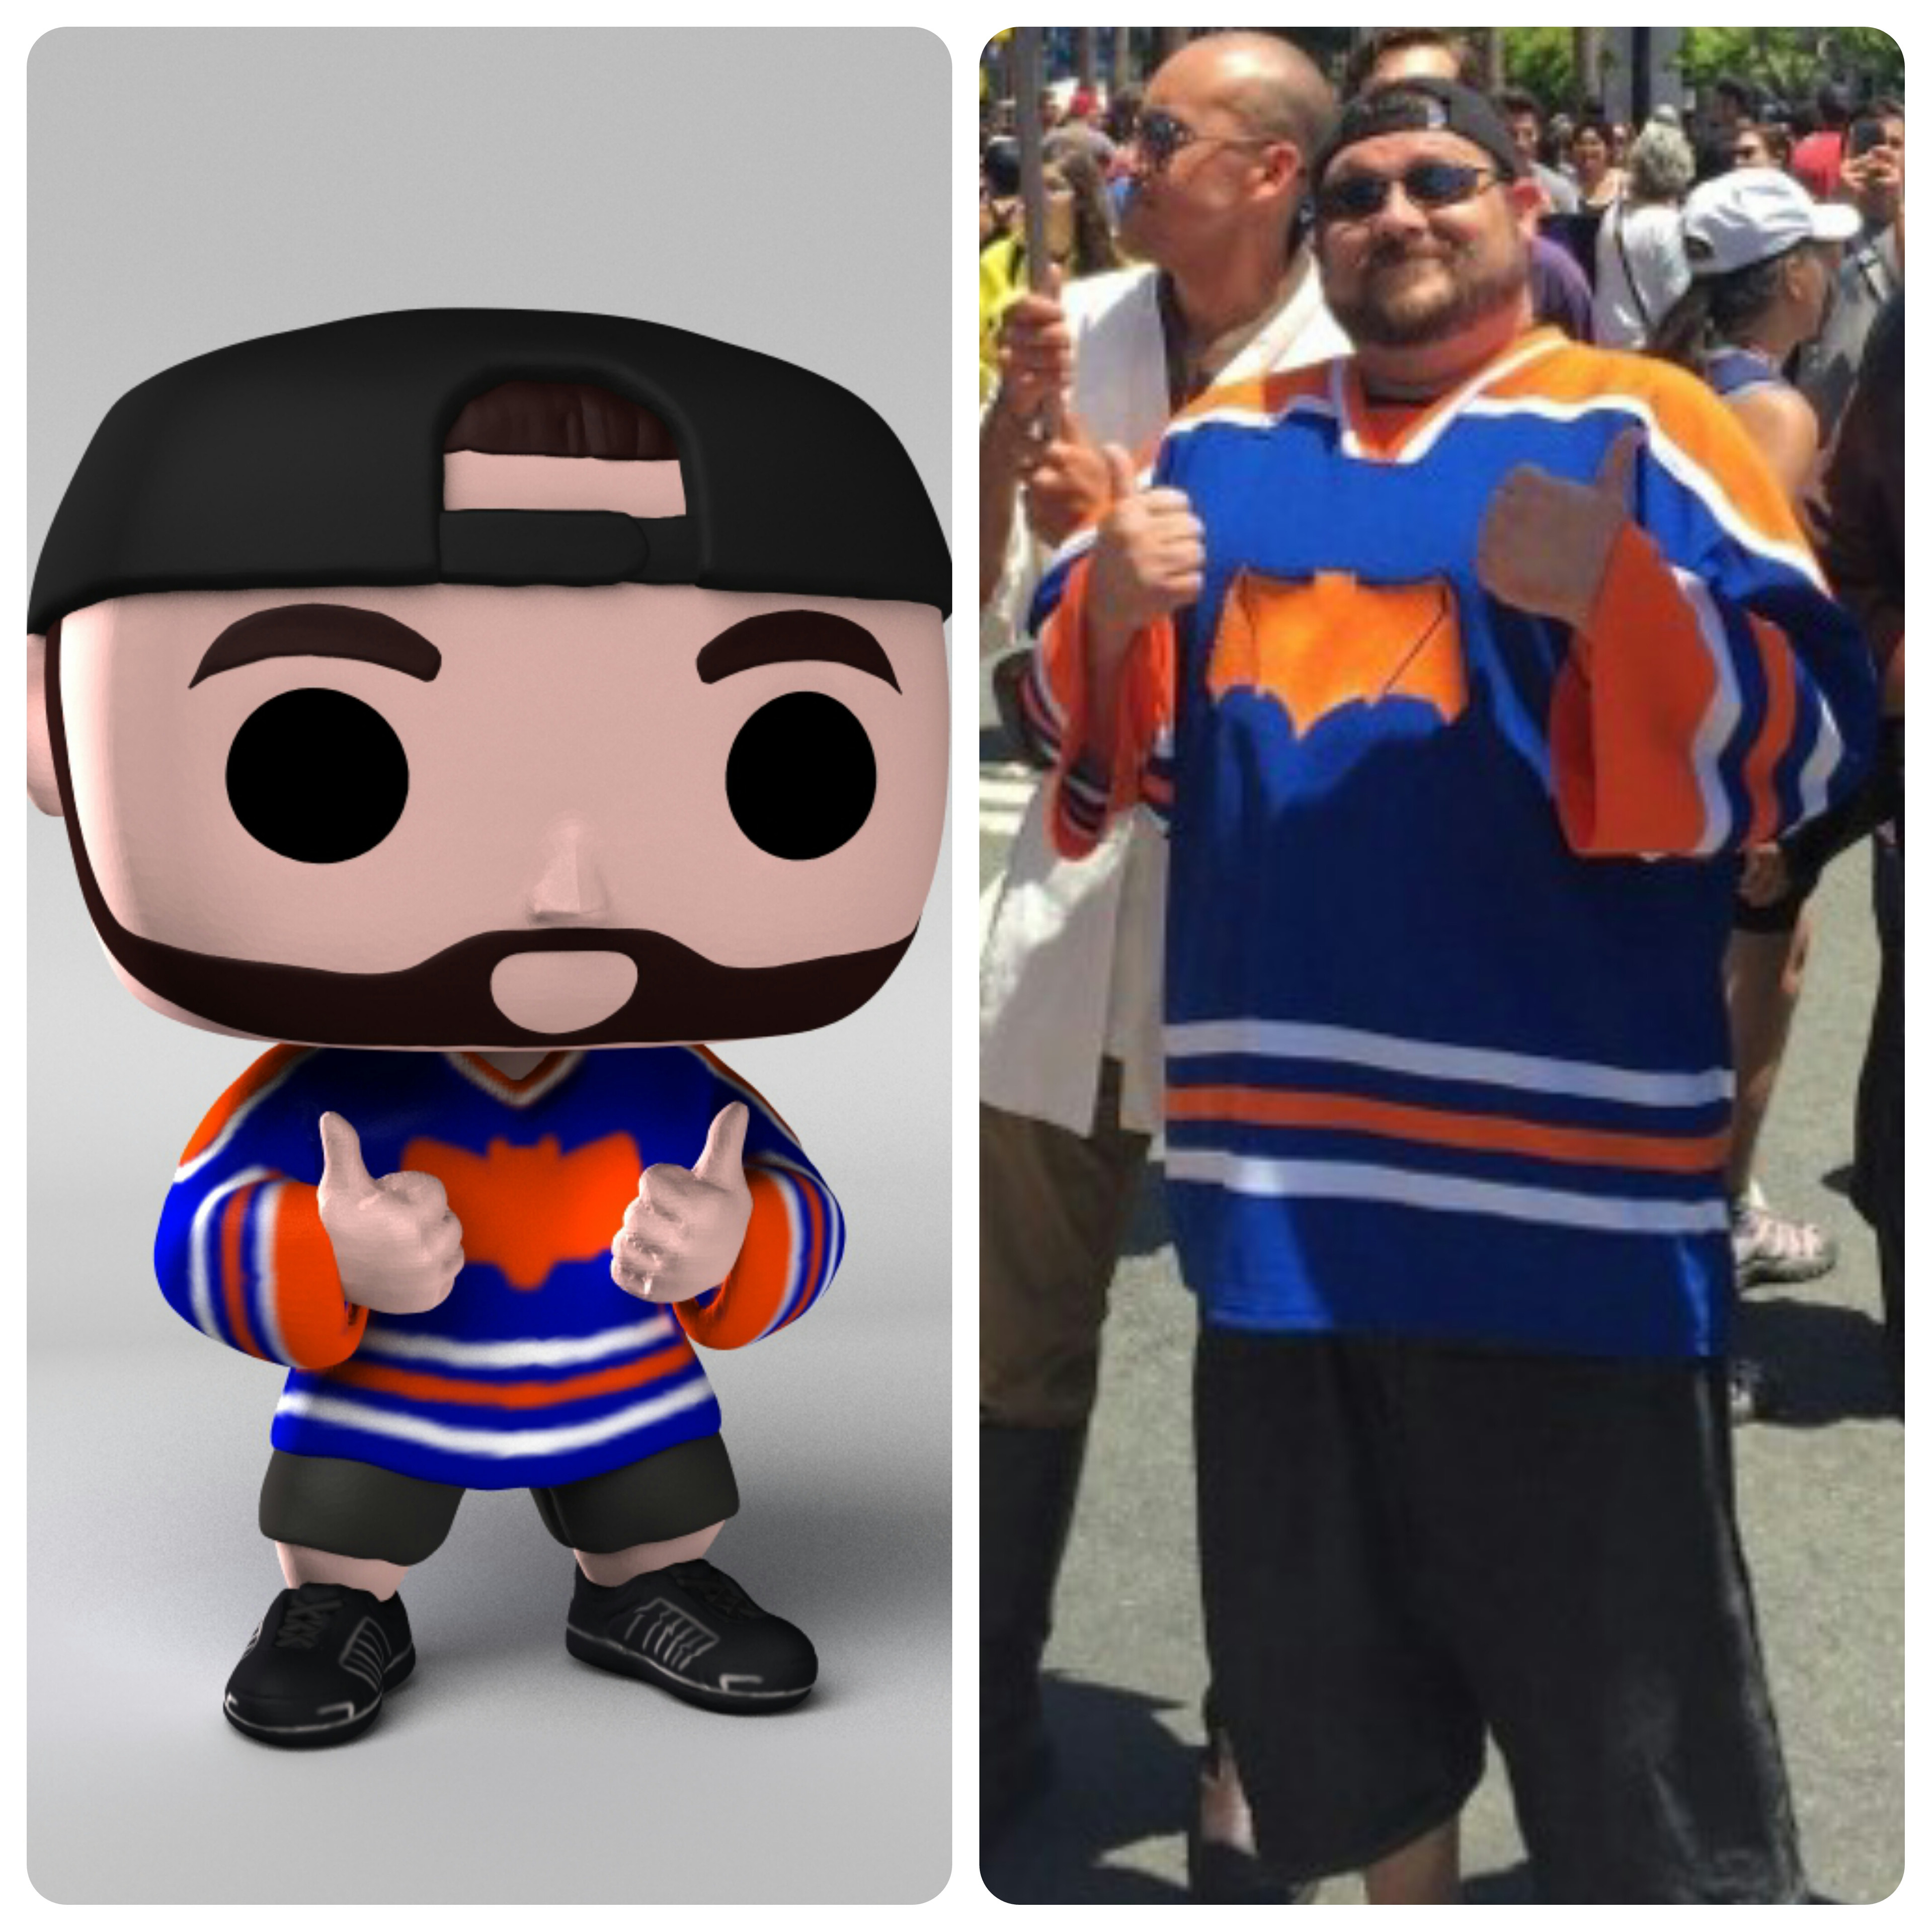 Funko POP figure I designed in ZBrush, based on my Kevin Smith cosplay.